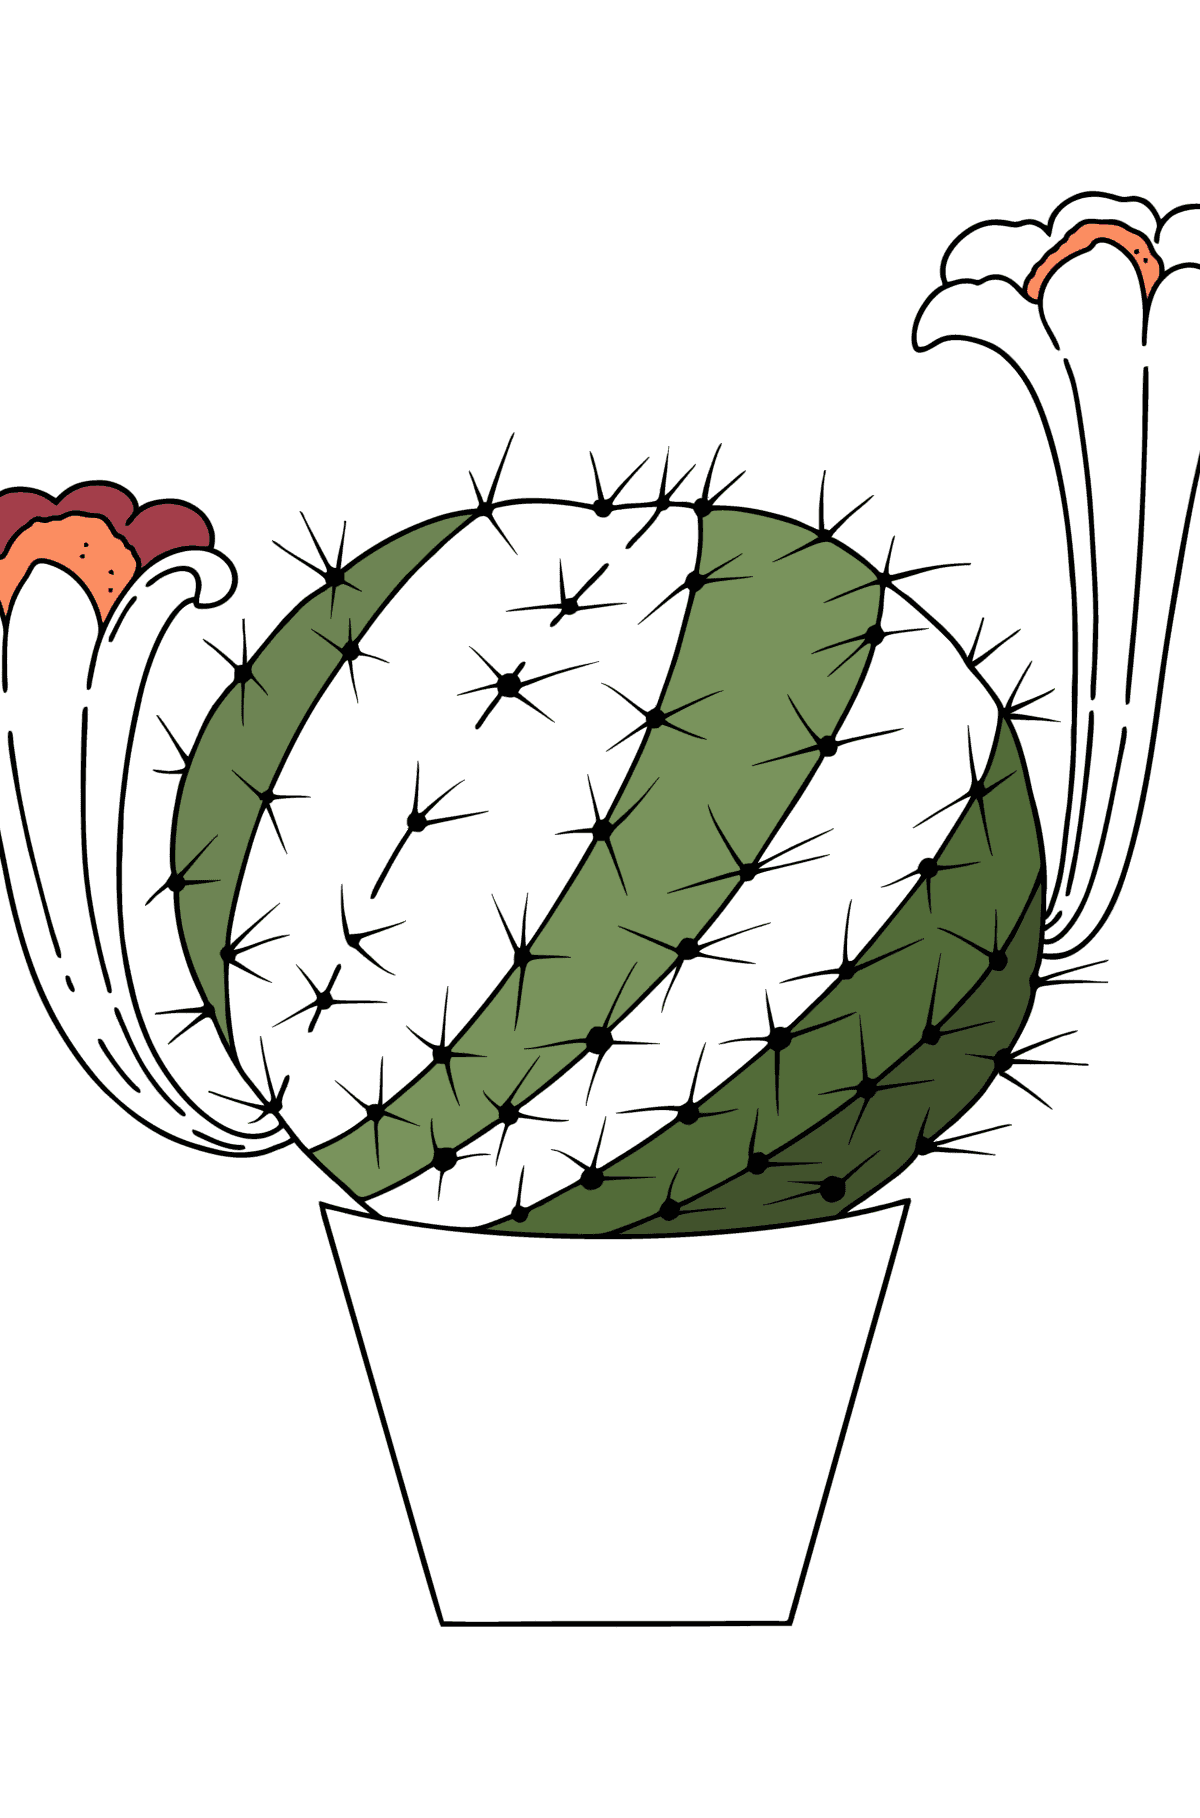 Rebutia Bolivia Cactus coloring page - Coloring Pages for Kids